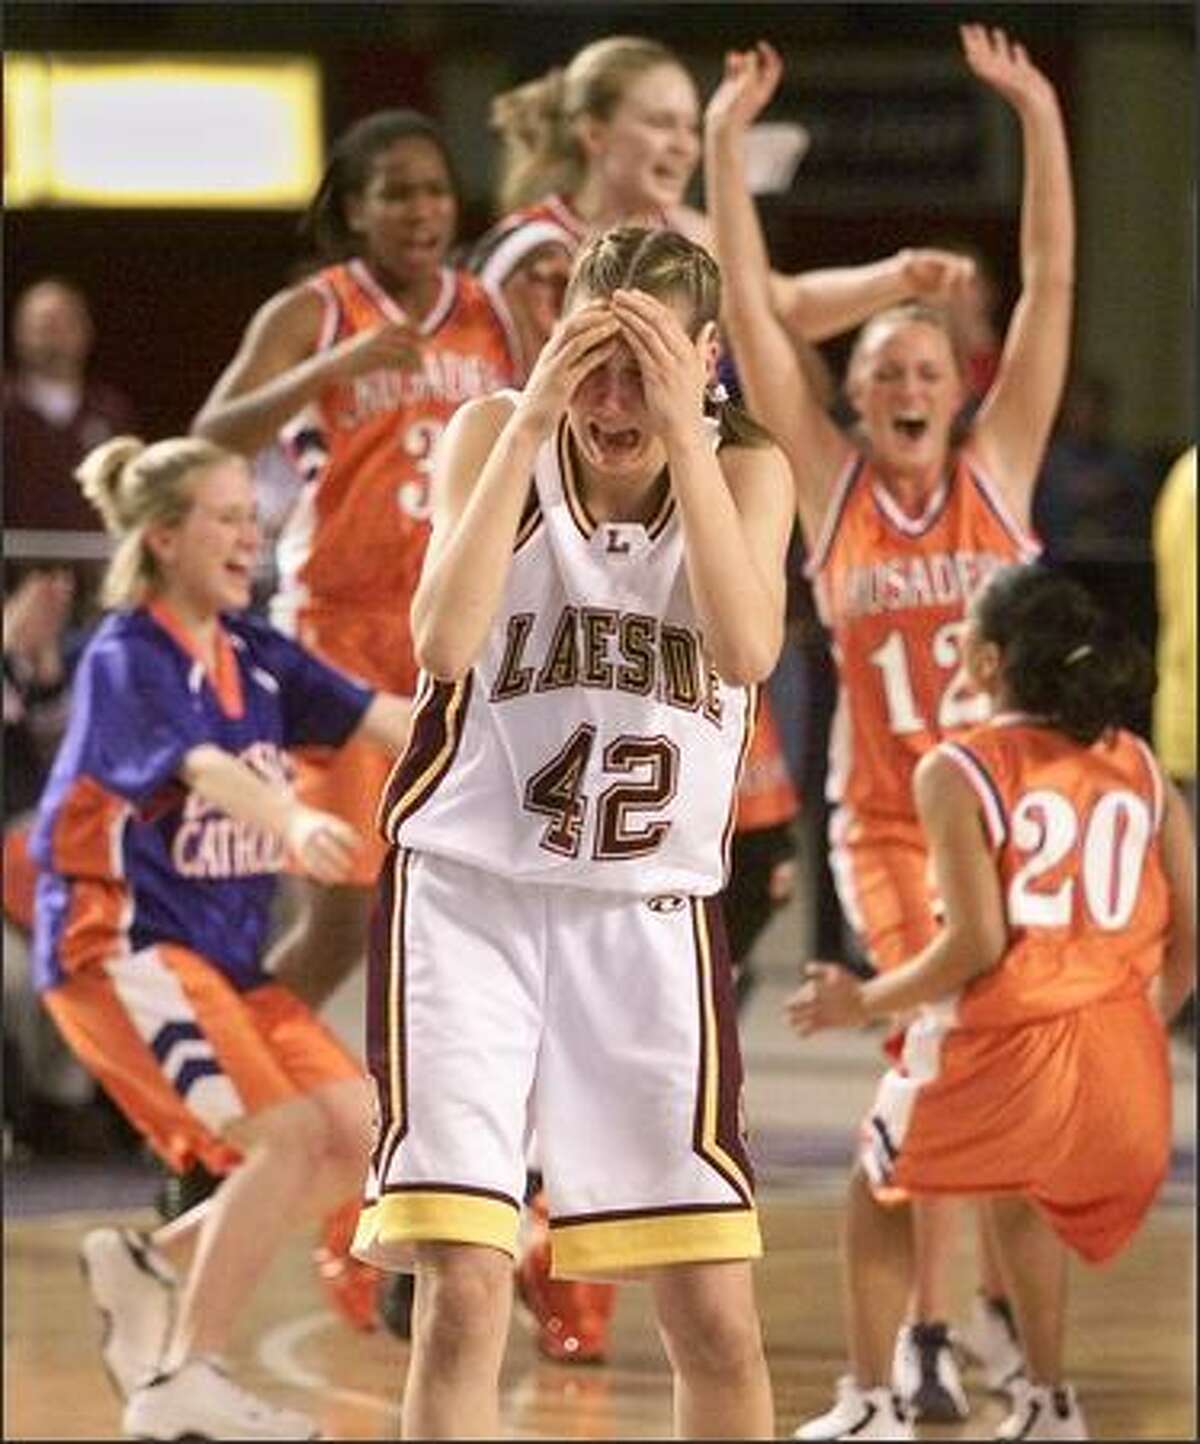 Lakeside's Eleanor Miller walks away in tears as Eastside Catholic celebrates their 49-43 victory in their semi-final game at the Tacoma Dome on March 1, 2002. (Photo by Mike Urban/Seattle Post-Intelligencer)